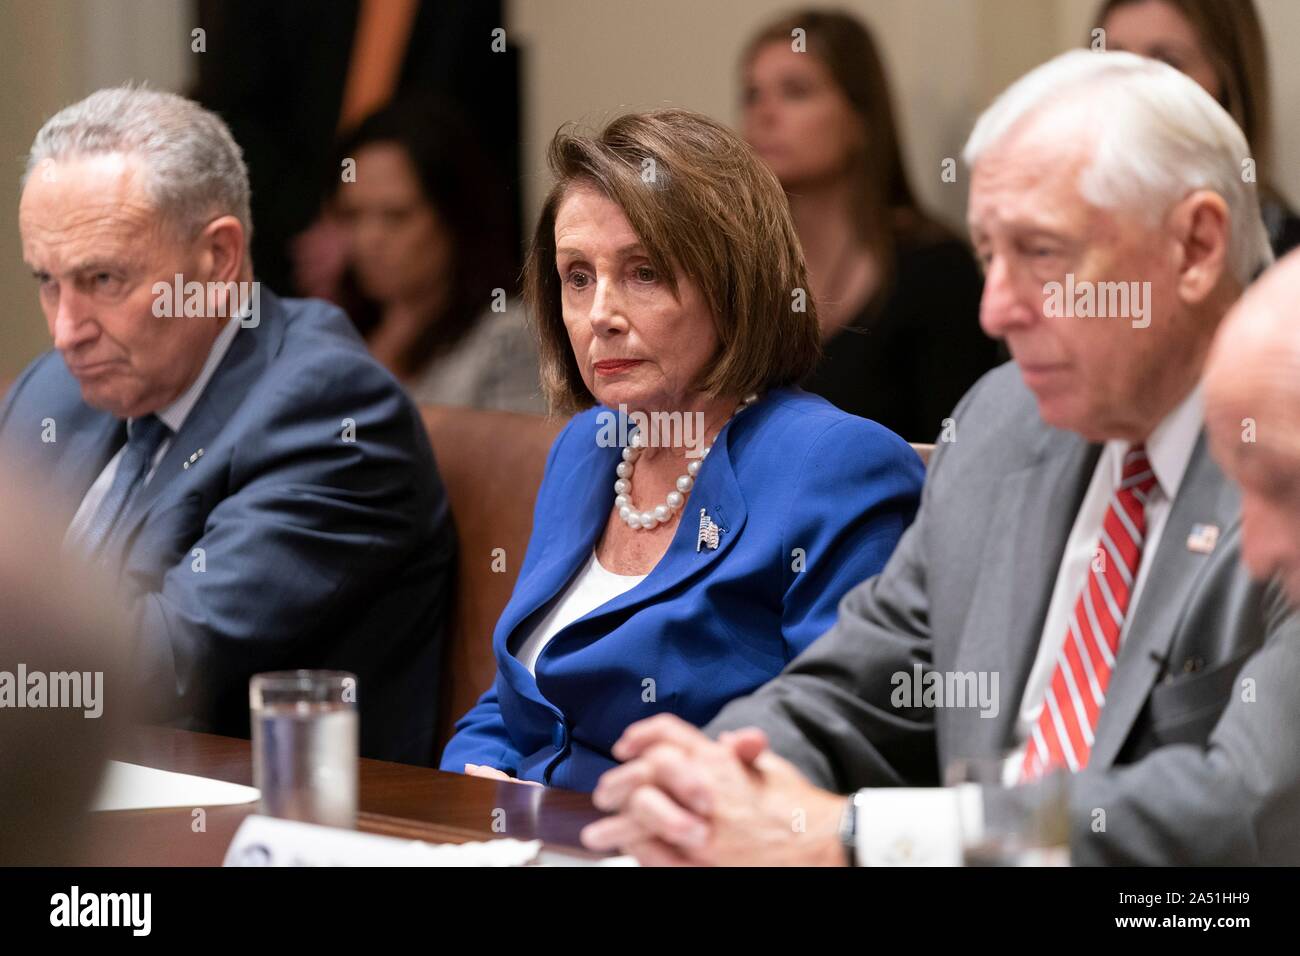 Washington, United States of America. 16 October, 2019. U.S Speaker of the House Nancy Pelosi, center, with Senate Minority Leader Chuck Schumer, left, and House Majority Leader Steny Hoyer, right, during a meeting on Kurdish crisis in the Cabinet Room of the White House October 16, 2019 in Washington, DC. The meeting called by the president to discuss the crisis along the Syrian - Turkey border devolved into a confrontation before the Speaker walked out.   Credit: Shealah Craighead/White House Photo/Alamy Live News Stock Photo